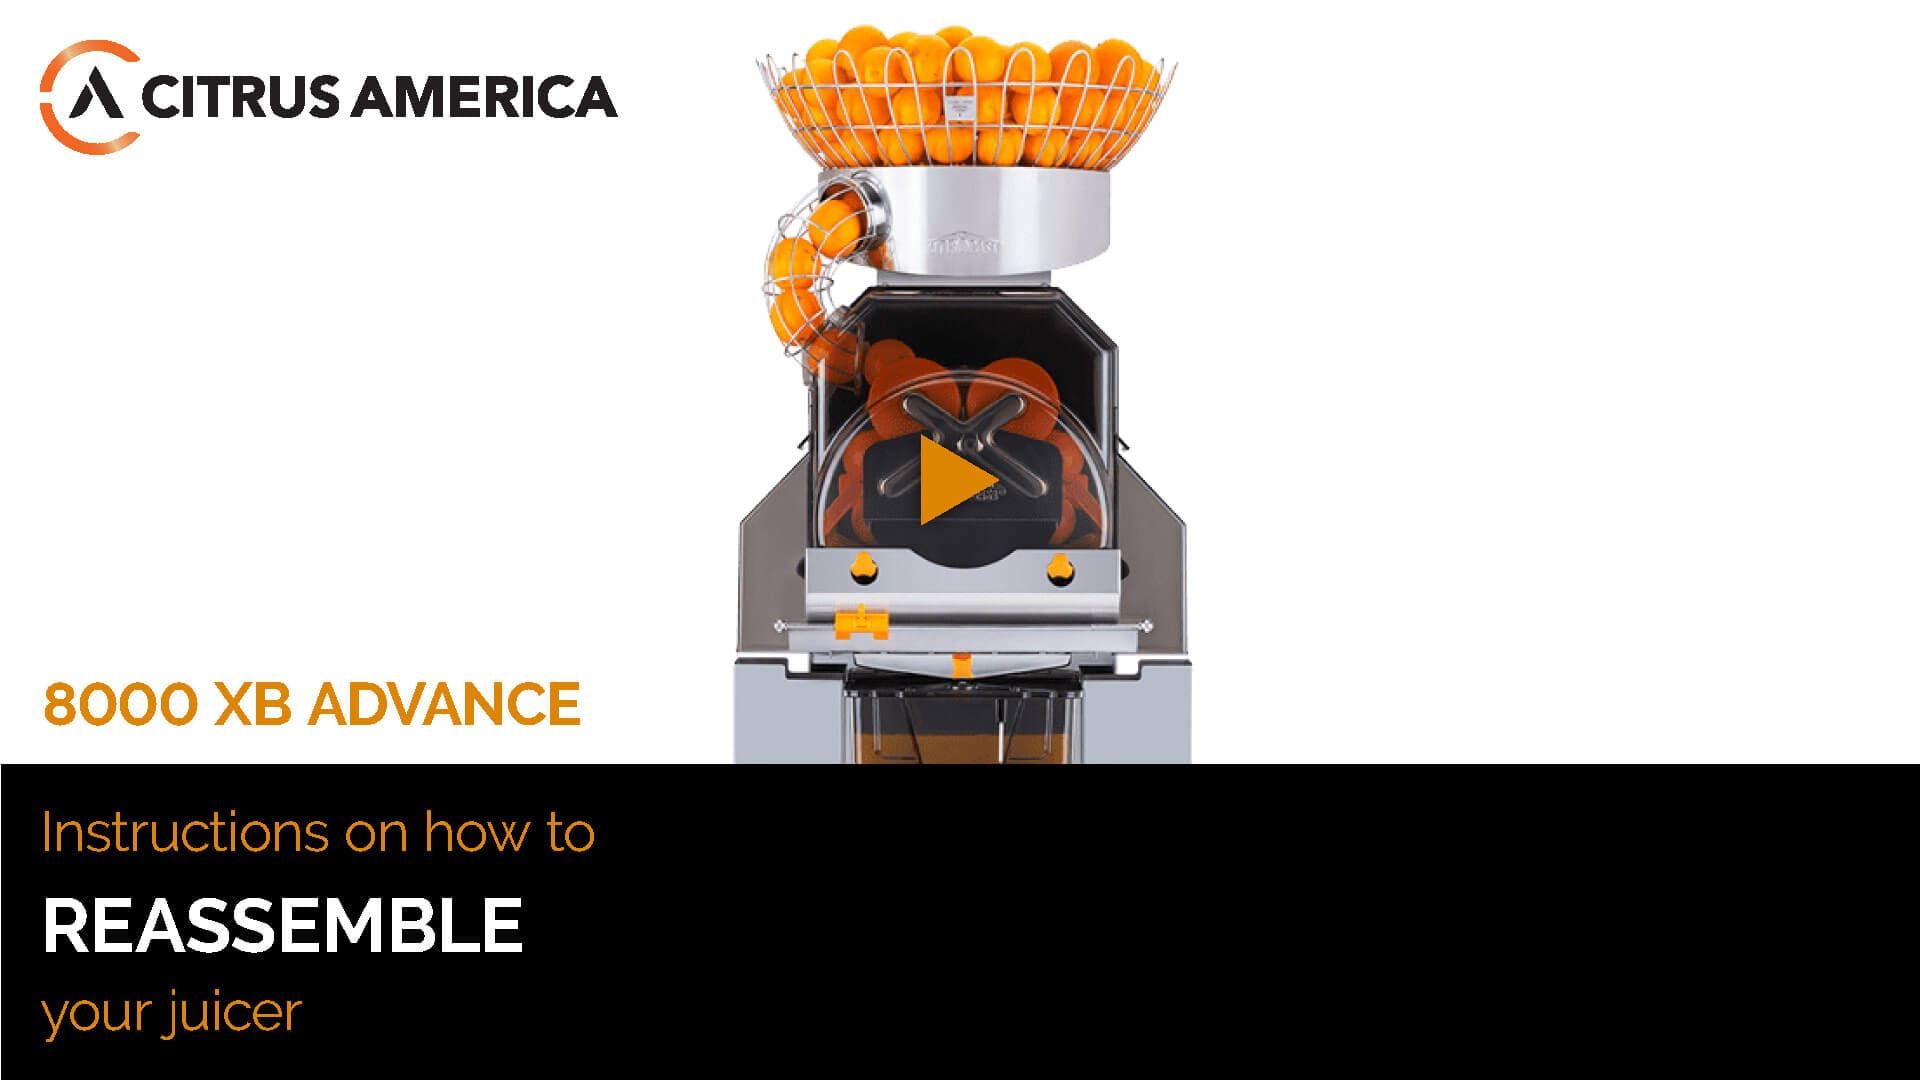 An instructional image titled "8000 XB ADVANCE: Training on how to REASSEMBLE your juicer." The top part features the Citrus America logo and a juicer filled with halved oranges. A play button overlay is centered, suggesting a video tutorial.